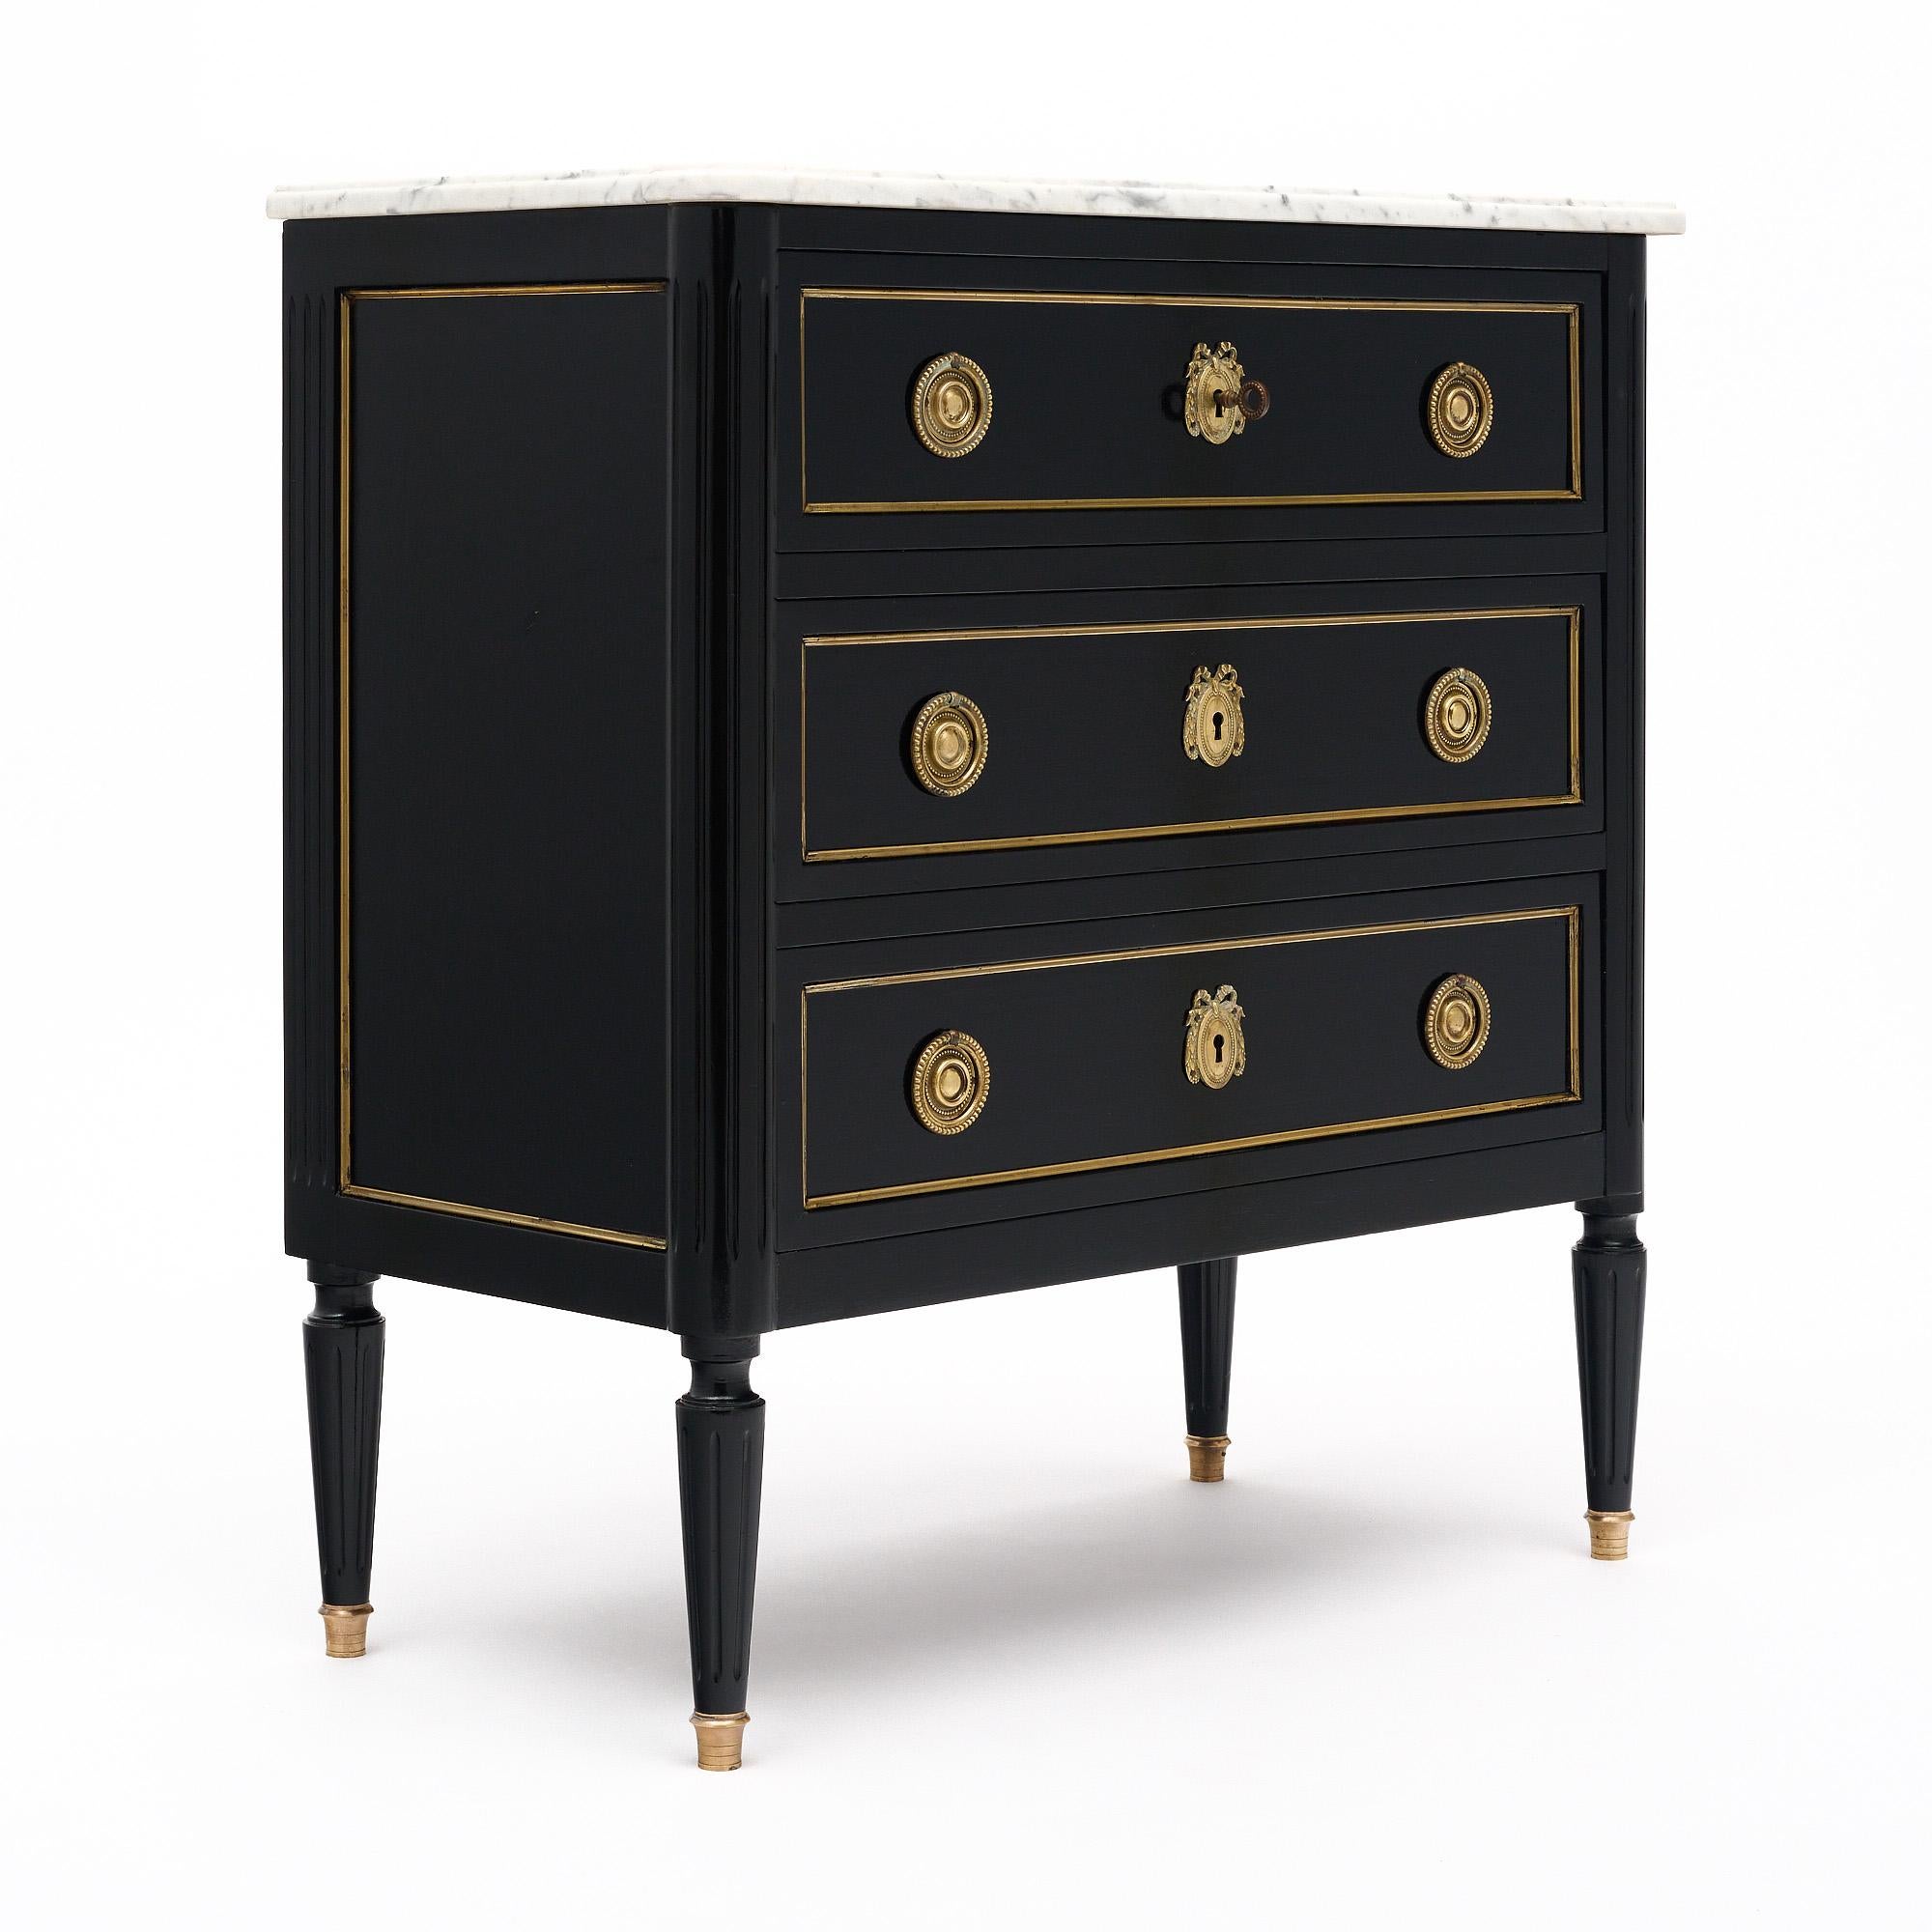 Chest of drawers in the Louis XVI style from France made of mahogany with an ebonized French polish finish of museum-quality. The case piece has Three dovetailed drawers all trimmed with brass and featuring cast brass hardware and pulls. There is